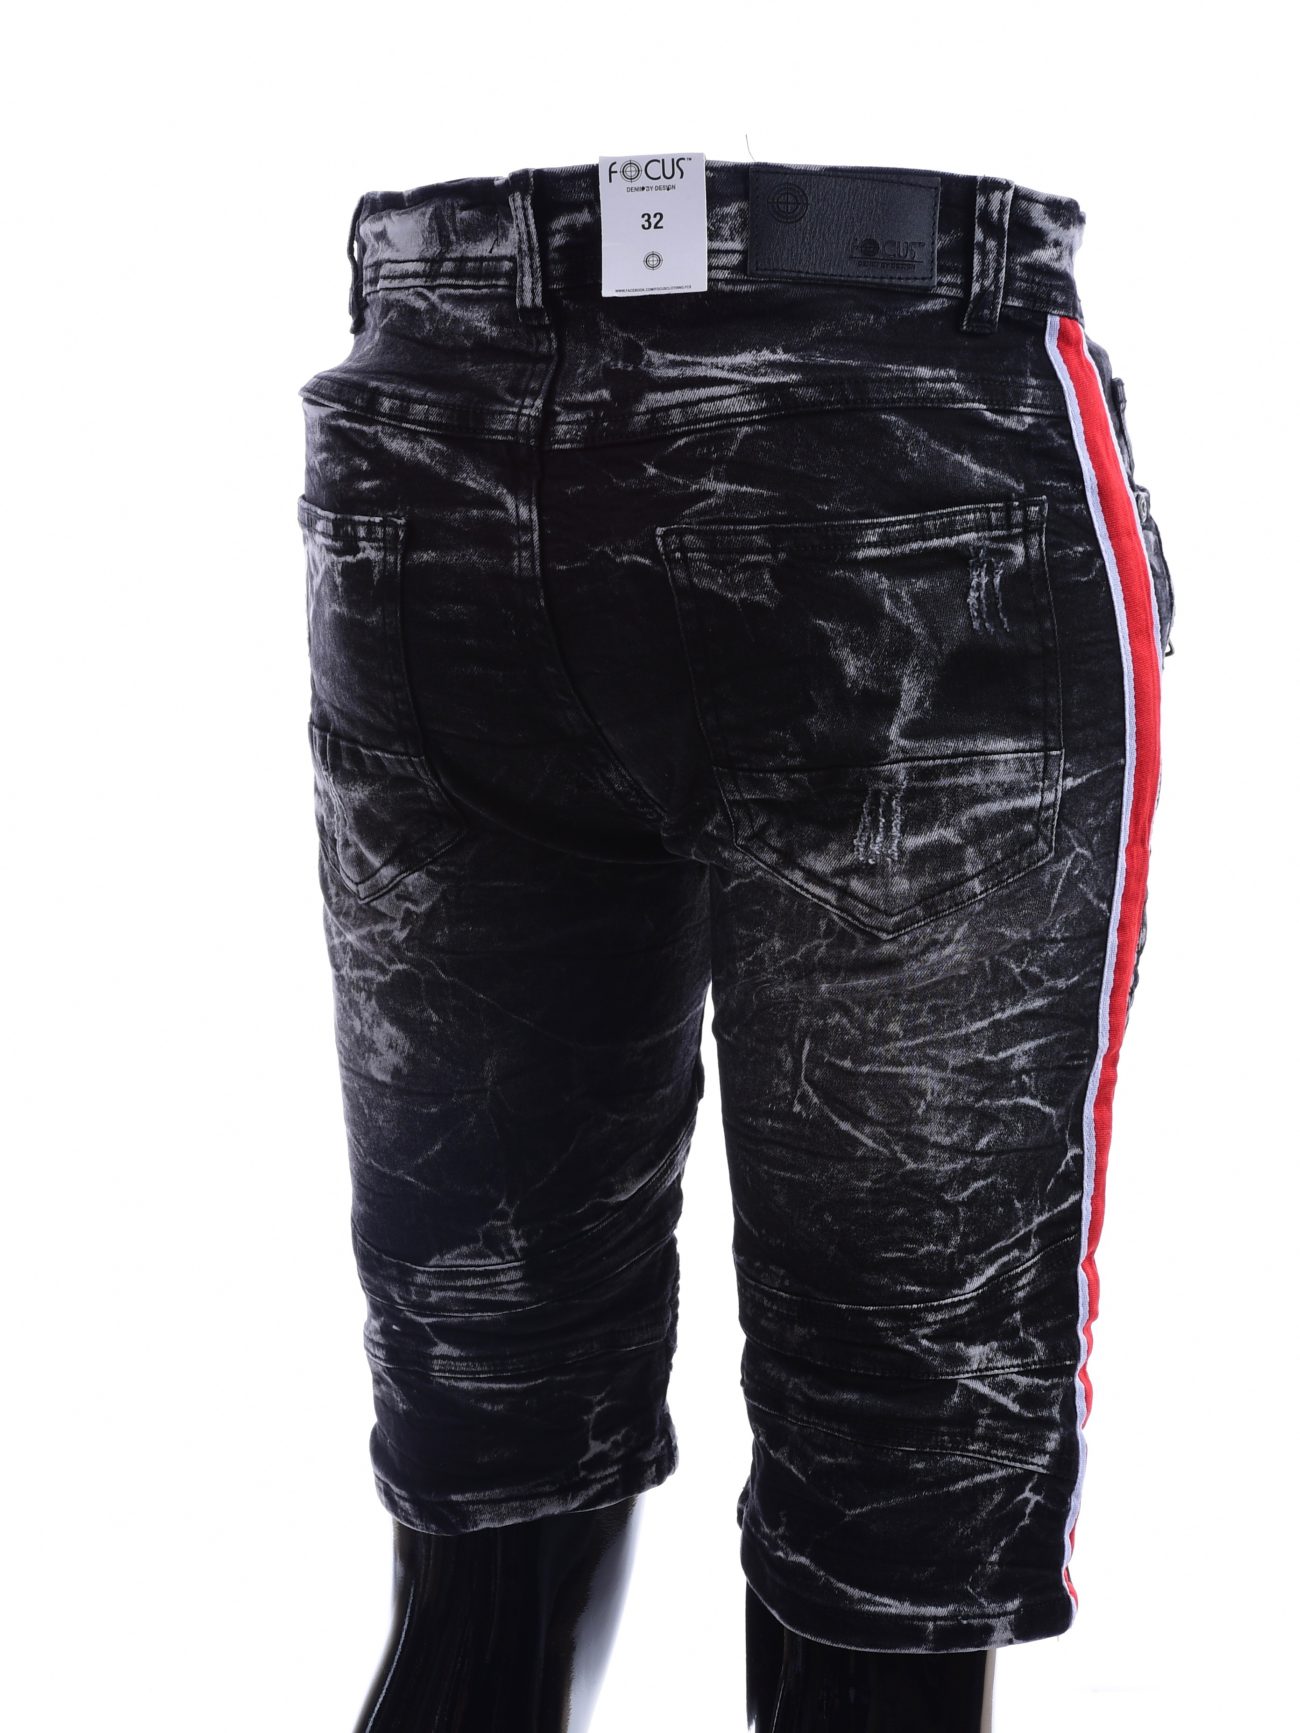 mens jeans with red stripe